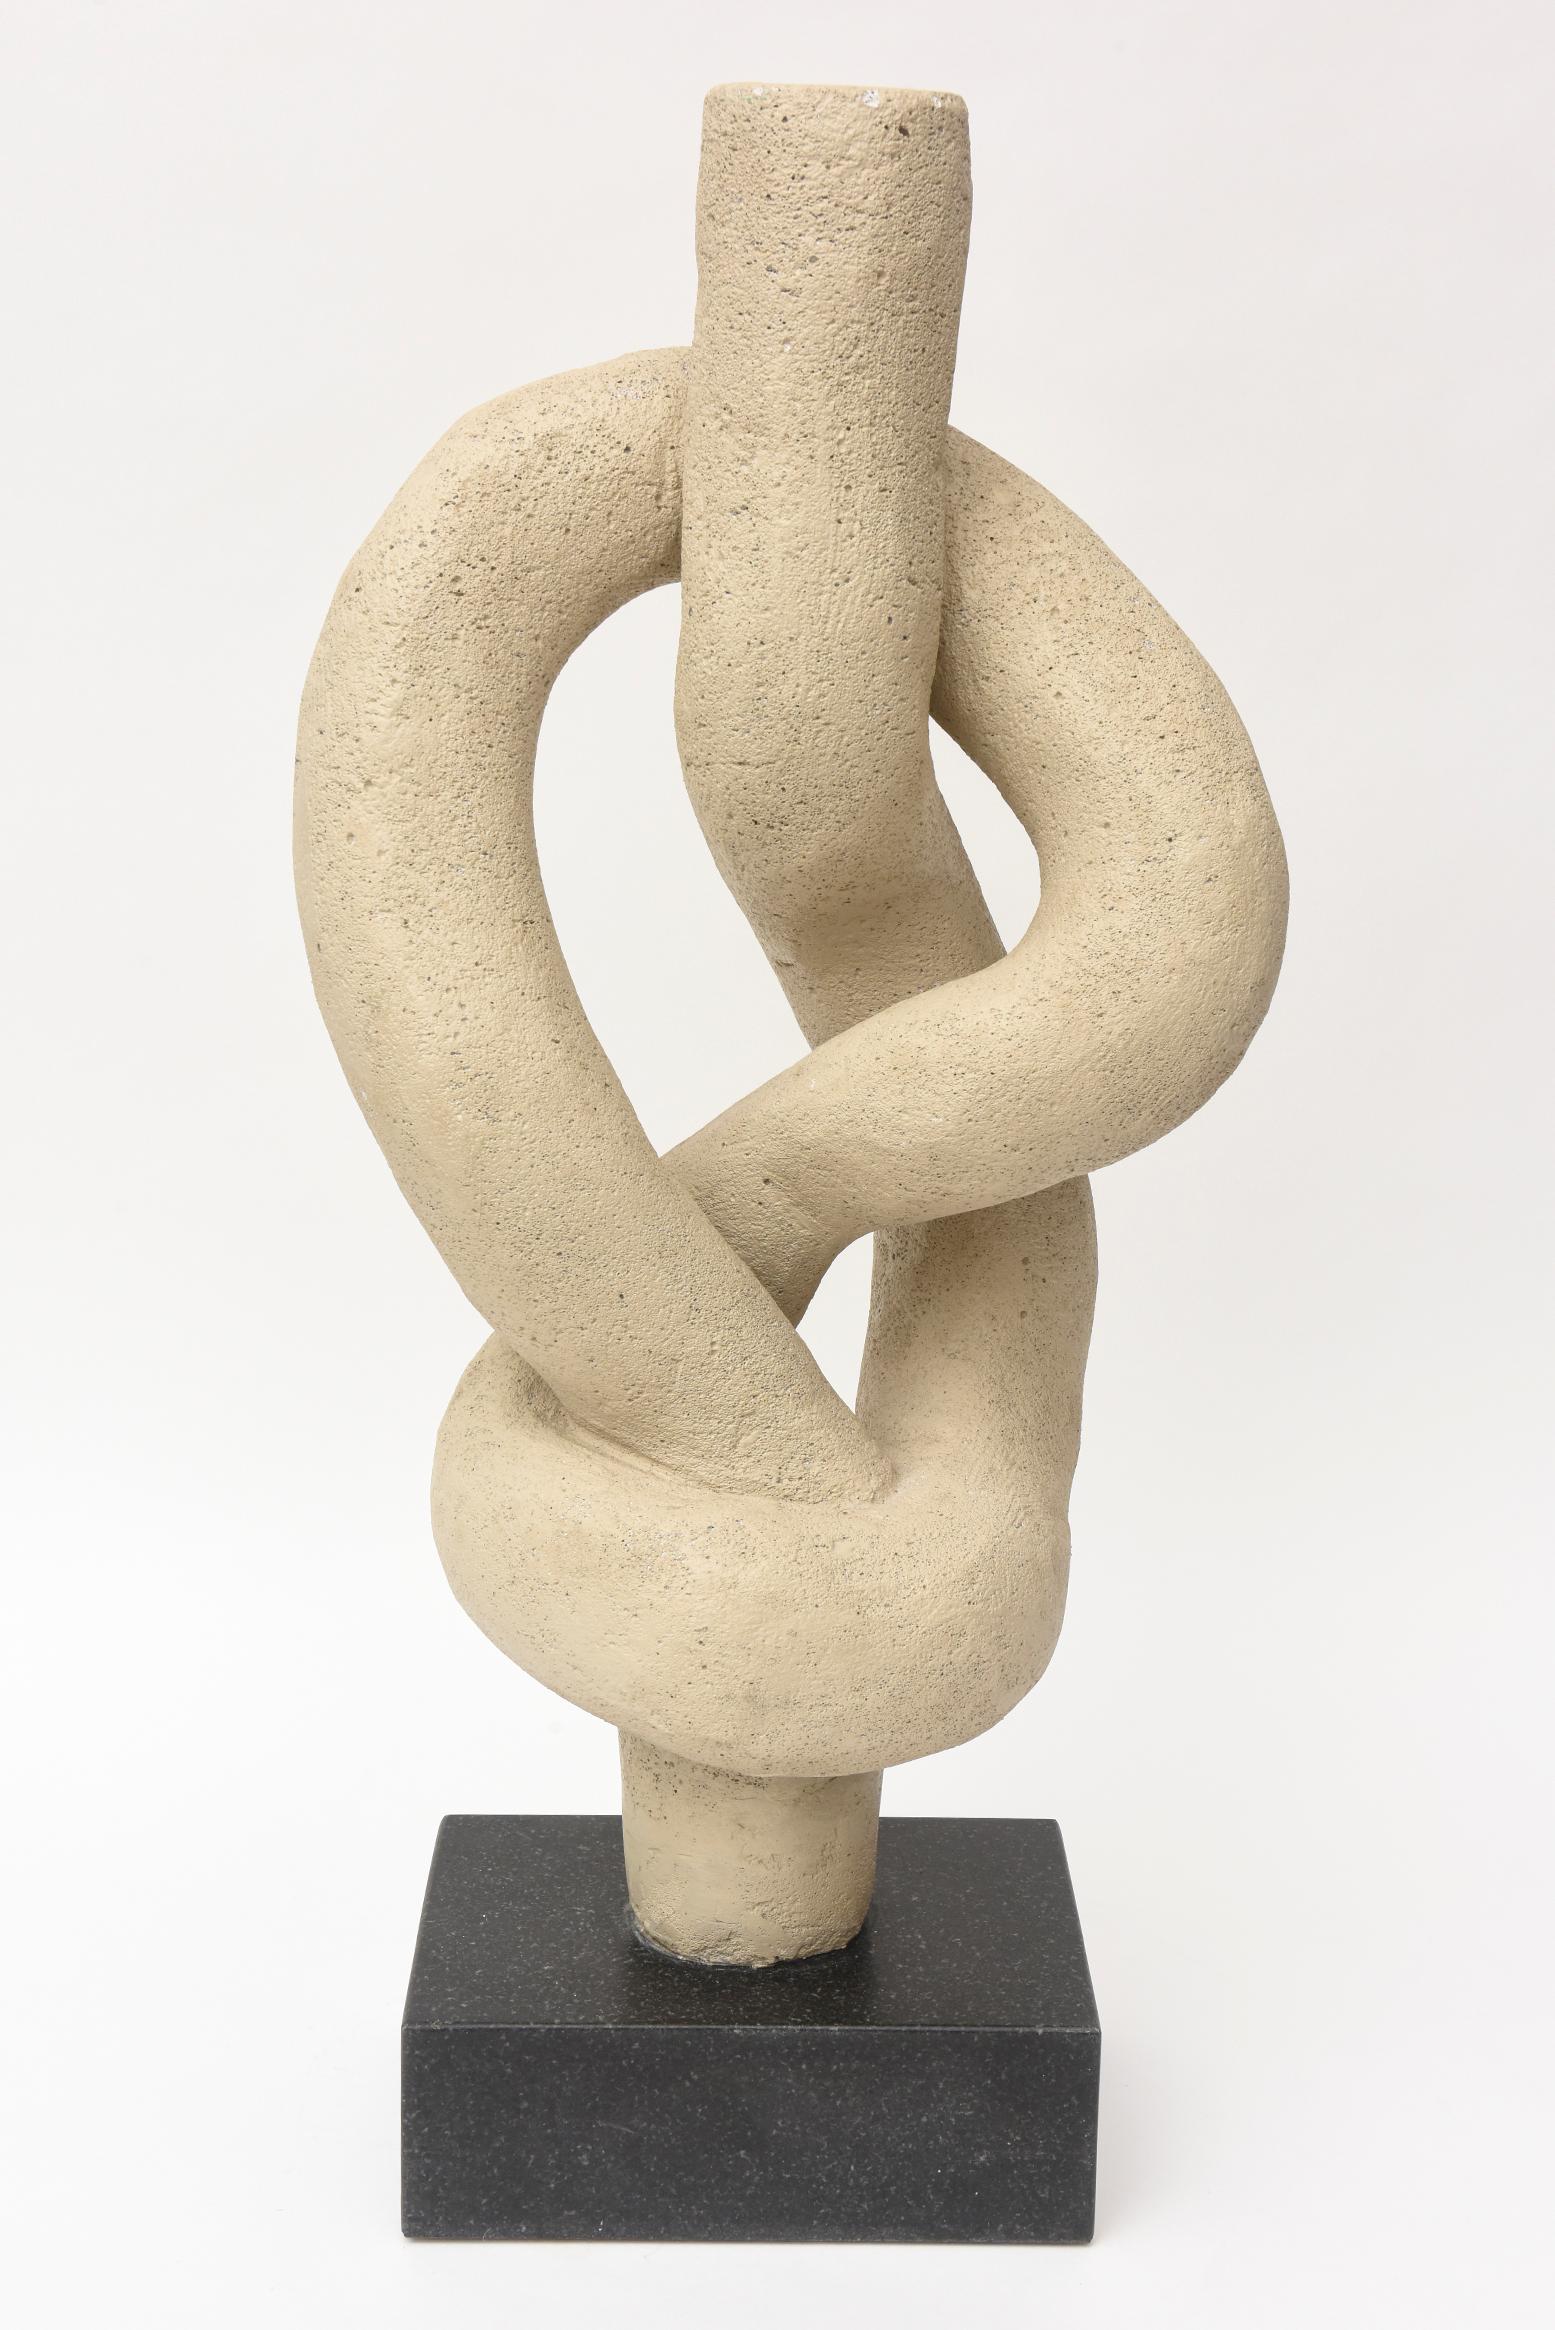 This substantial and tall organic modern sculpture is a mixed composition of cement, plaster and resin on a marble base. It is textural and has a pebbled finish of some sort. All is original. It's twisted and intertwined forms are like knotted